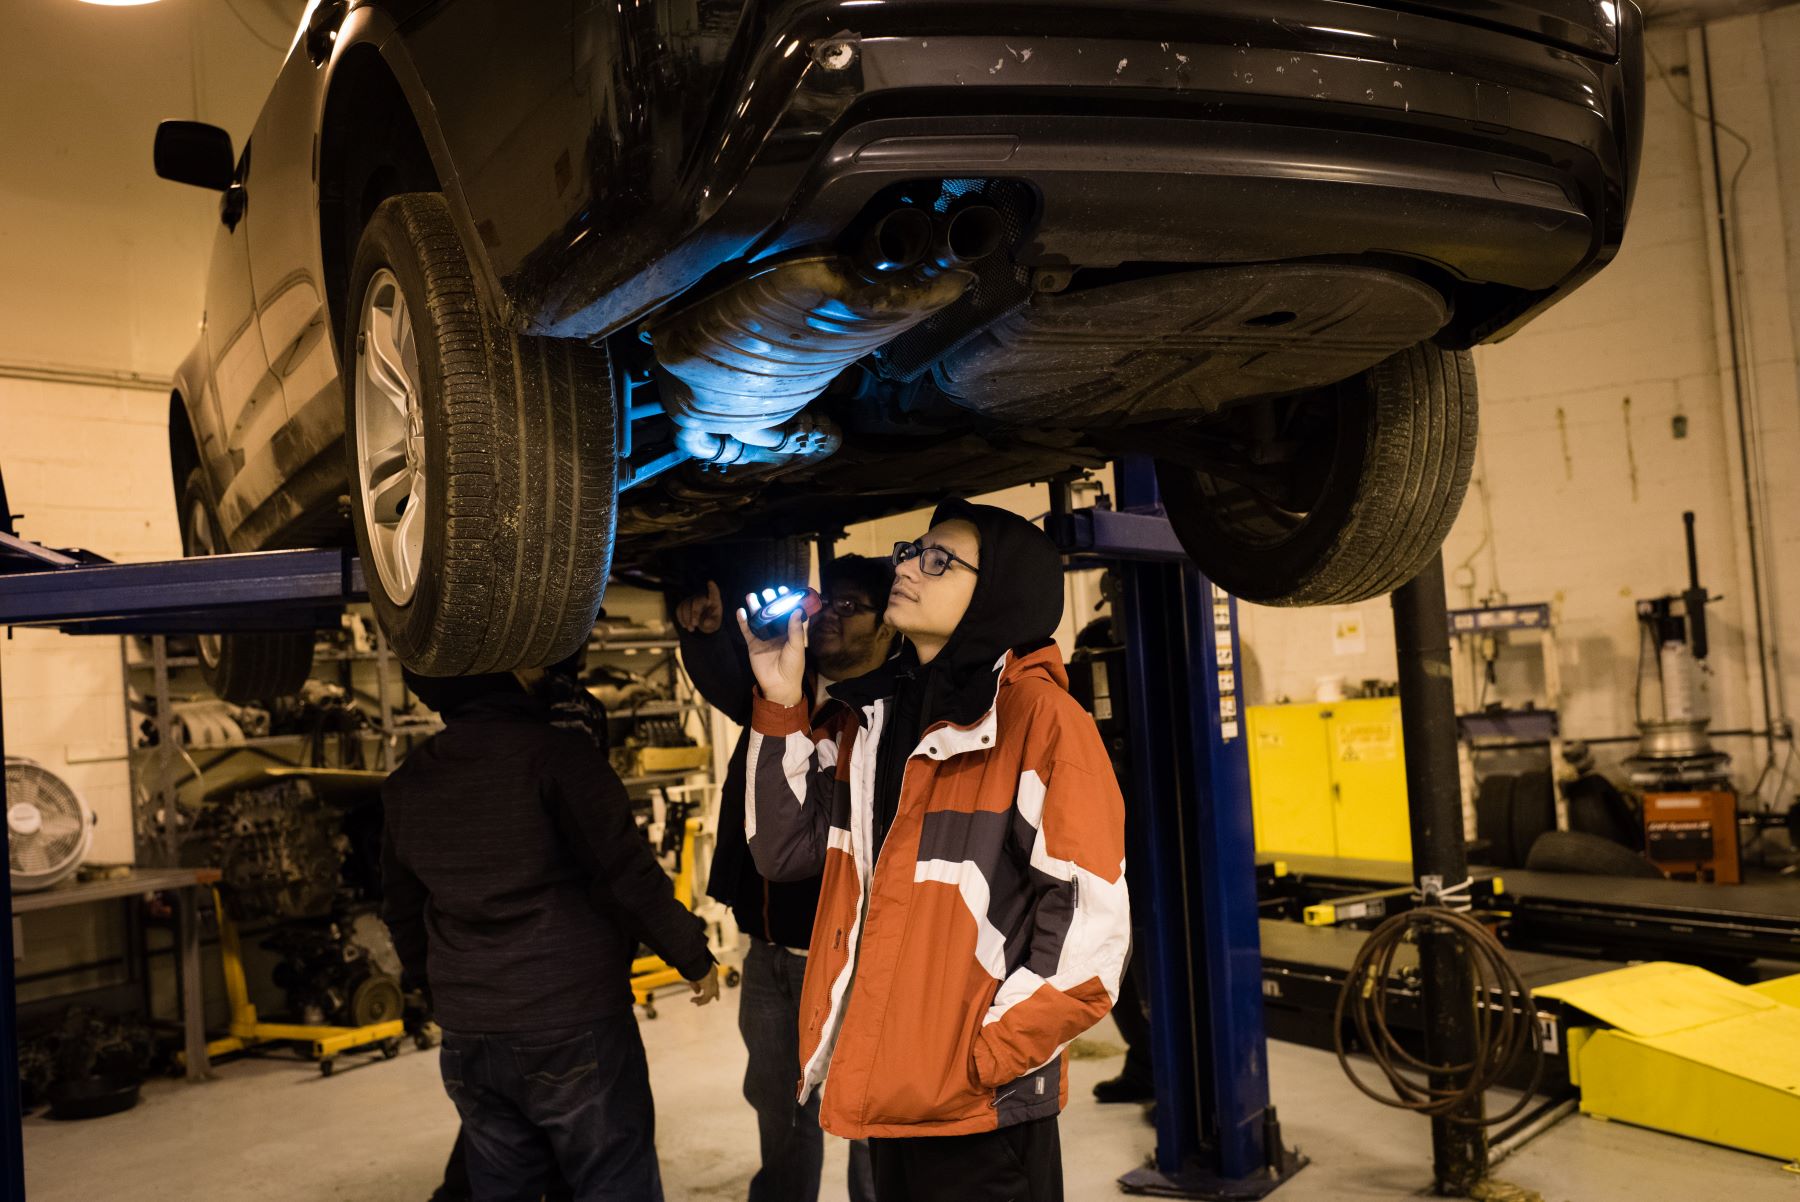 Diagnosing a fluid leak in a motor vehicle by examining under the car with a flashlight